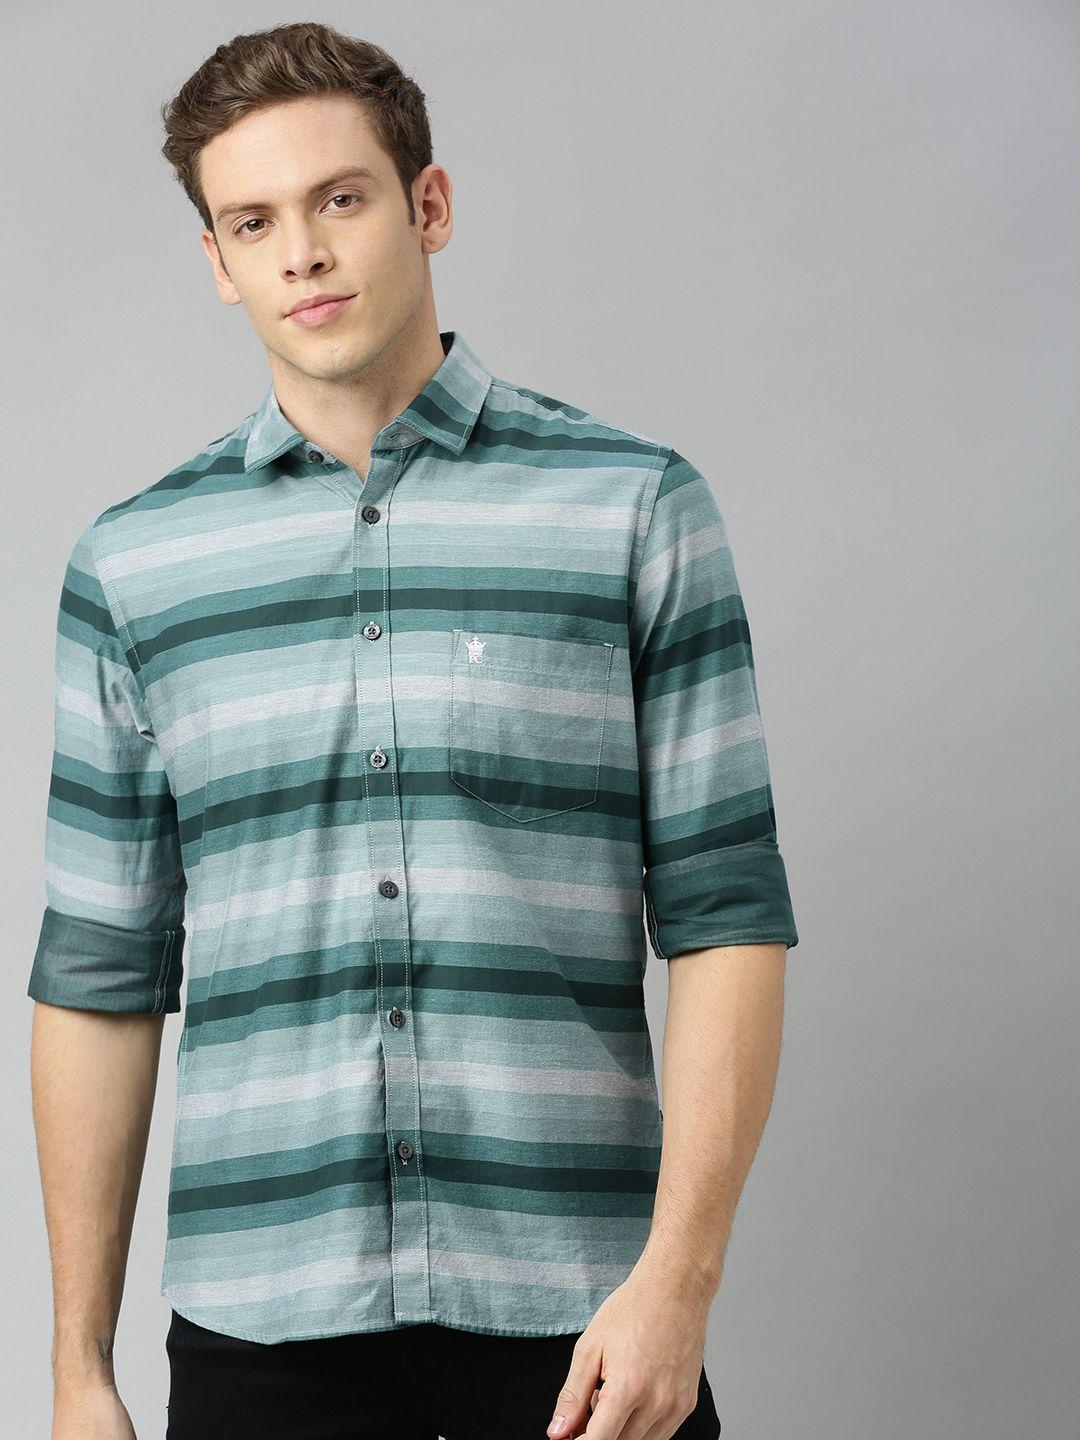 french connection men teal green slim fit striped casual shirt